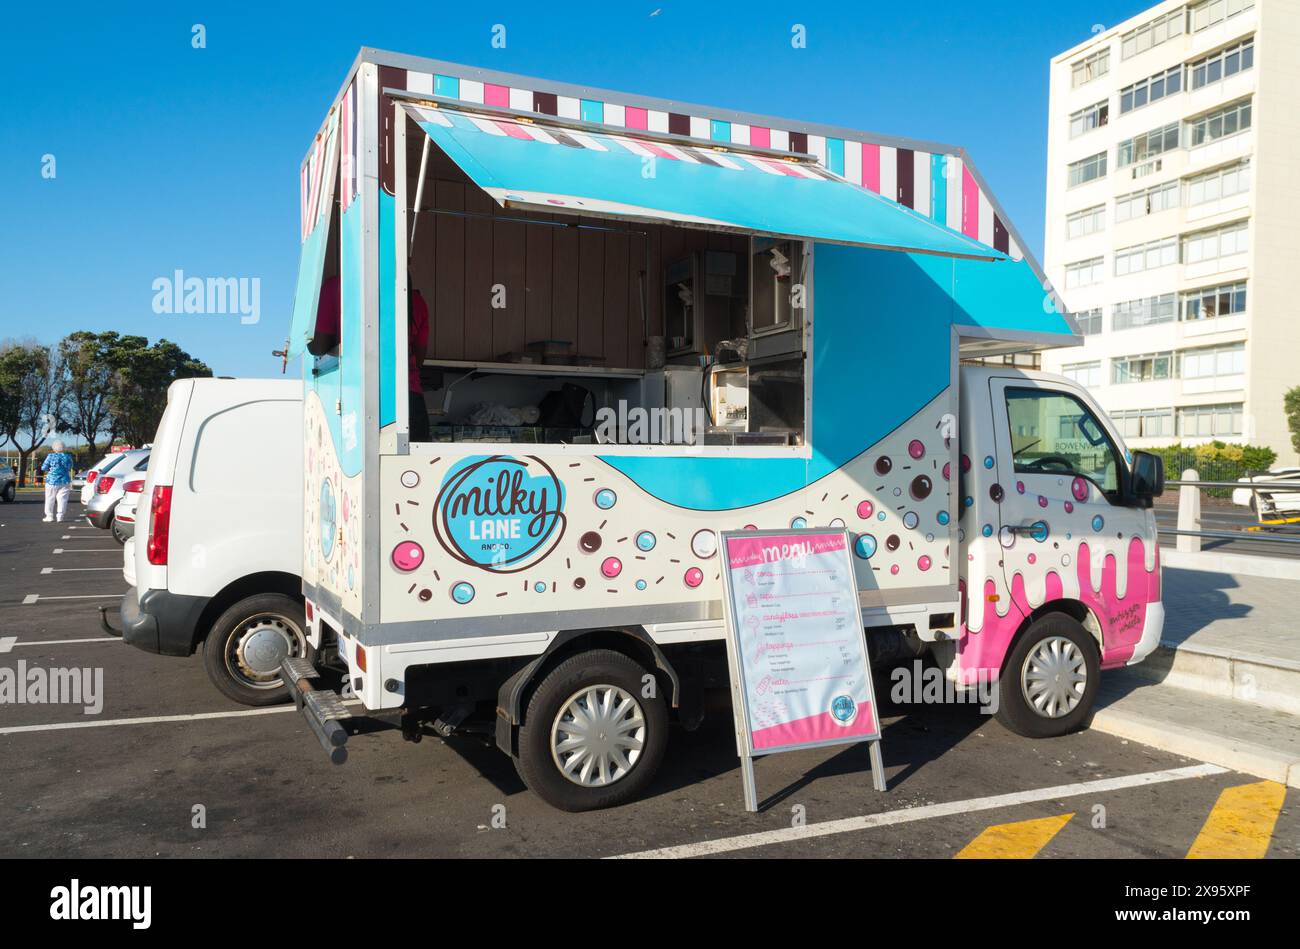 Milky Lane ice cream mobile van or pop up kiosk parked in a suburban parking area in Cape Town, South Africa Stock Photo